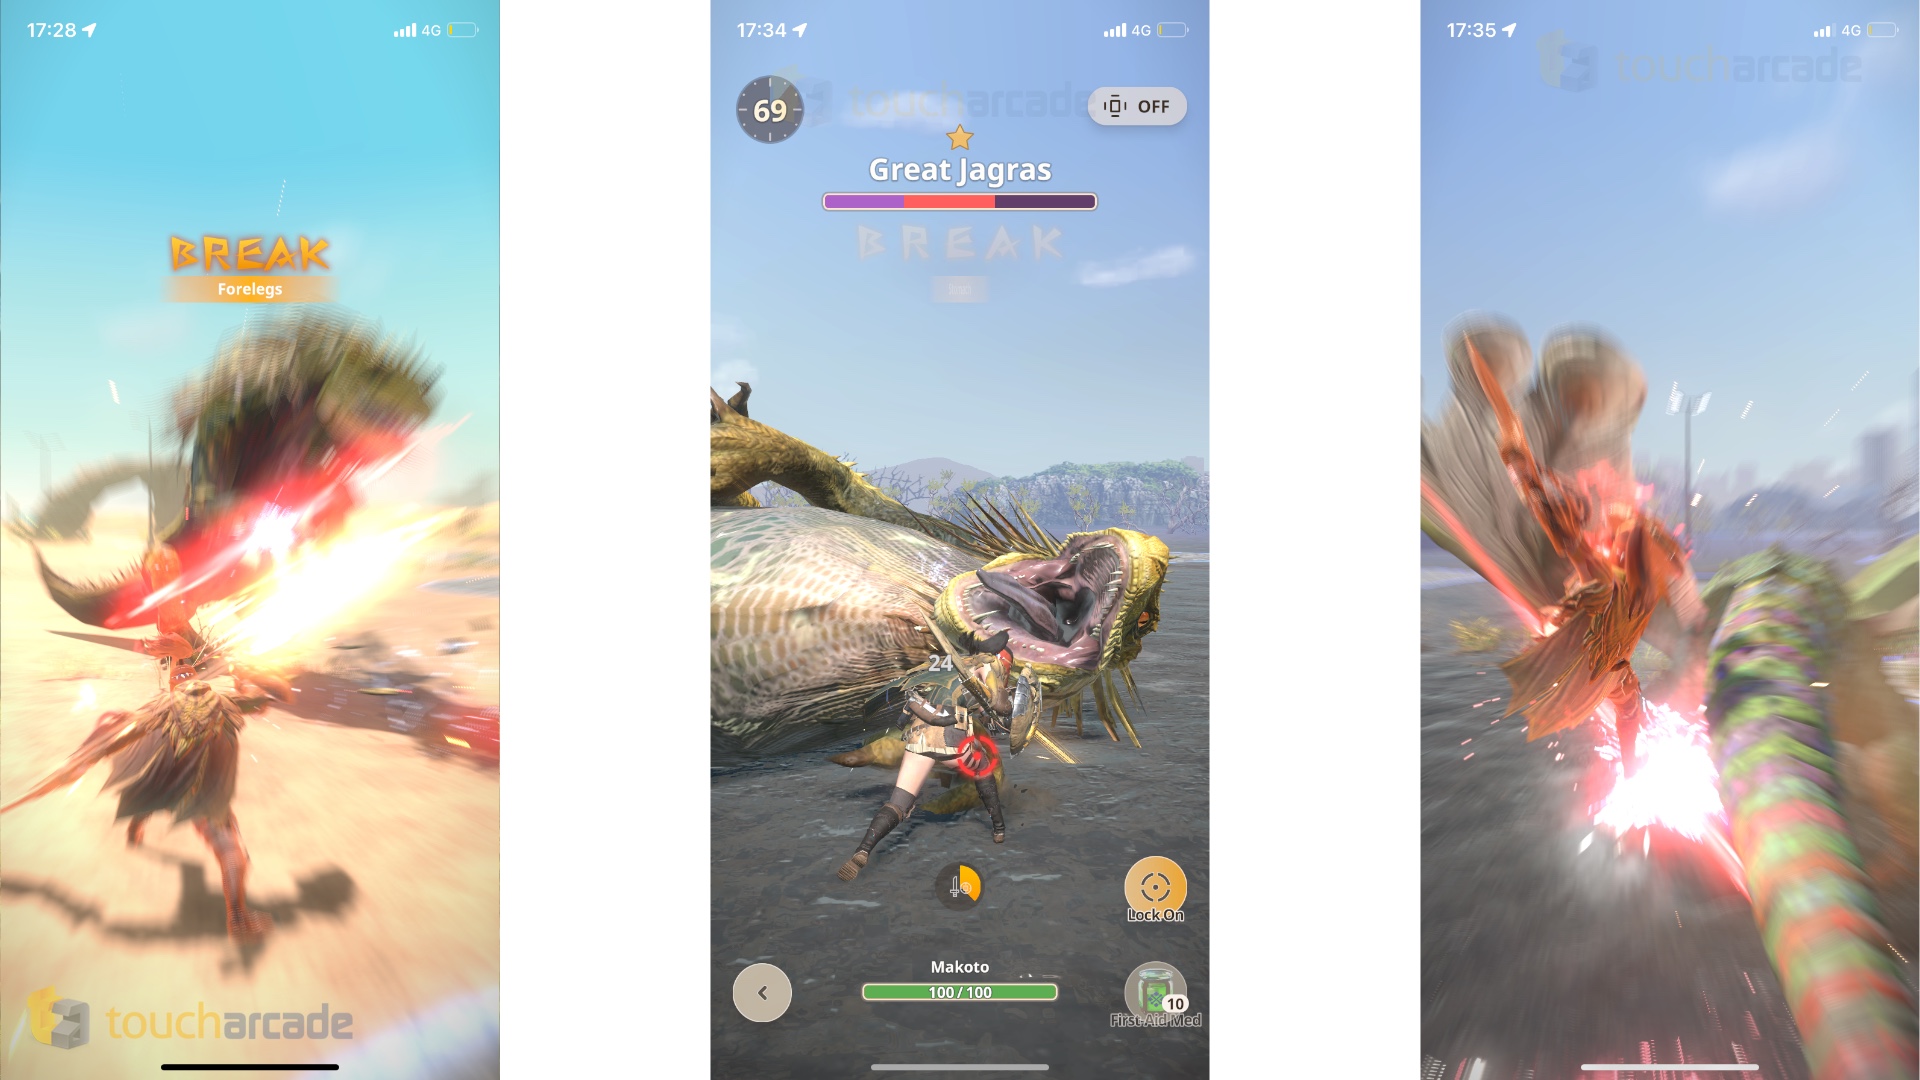 Monster Hunter Now' iOS Review – Launch Week Thoughts – TouchArcade